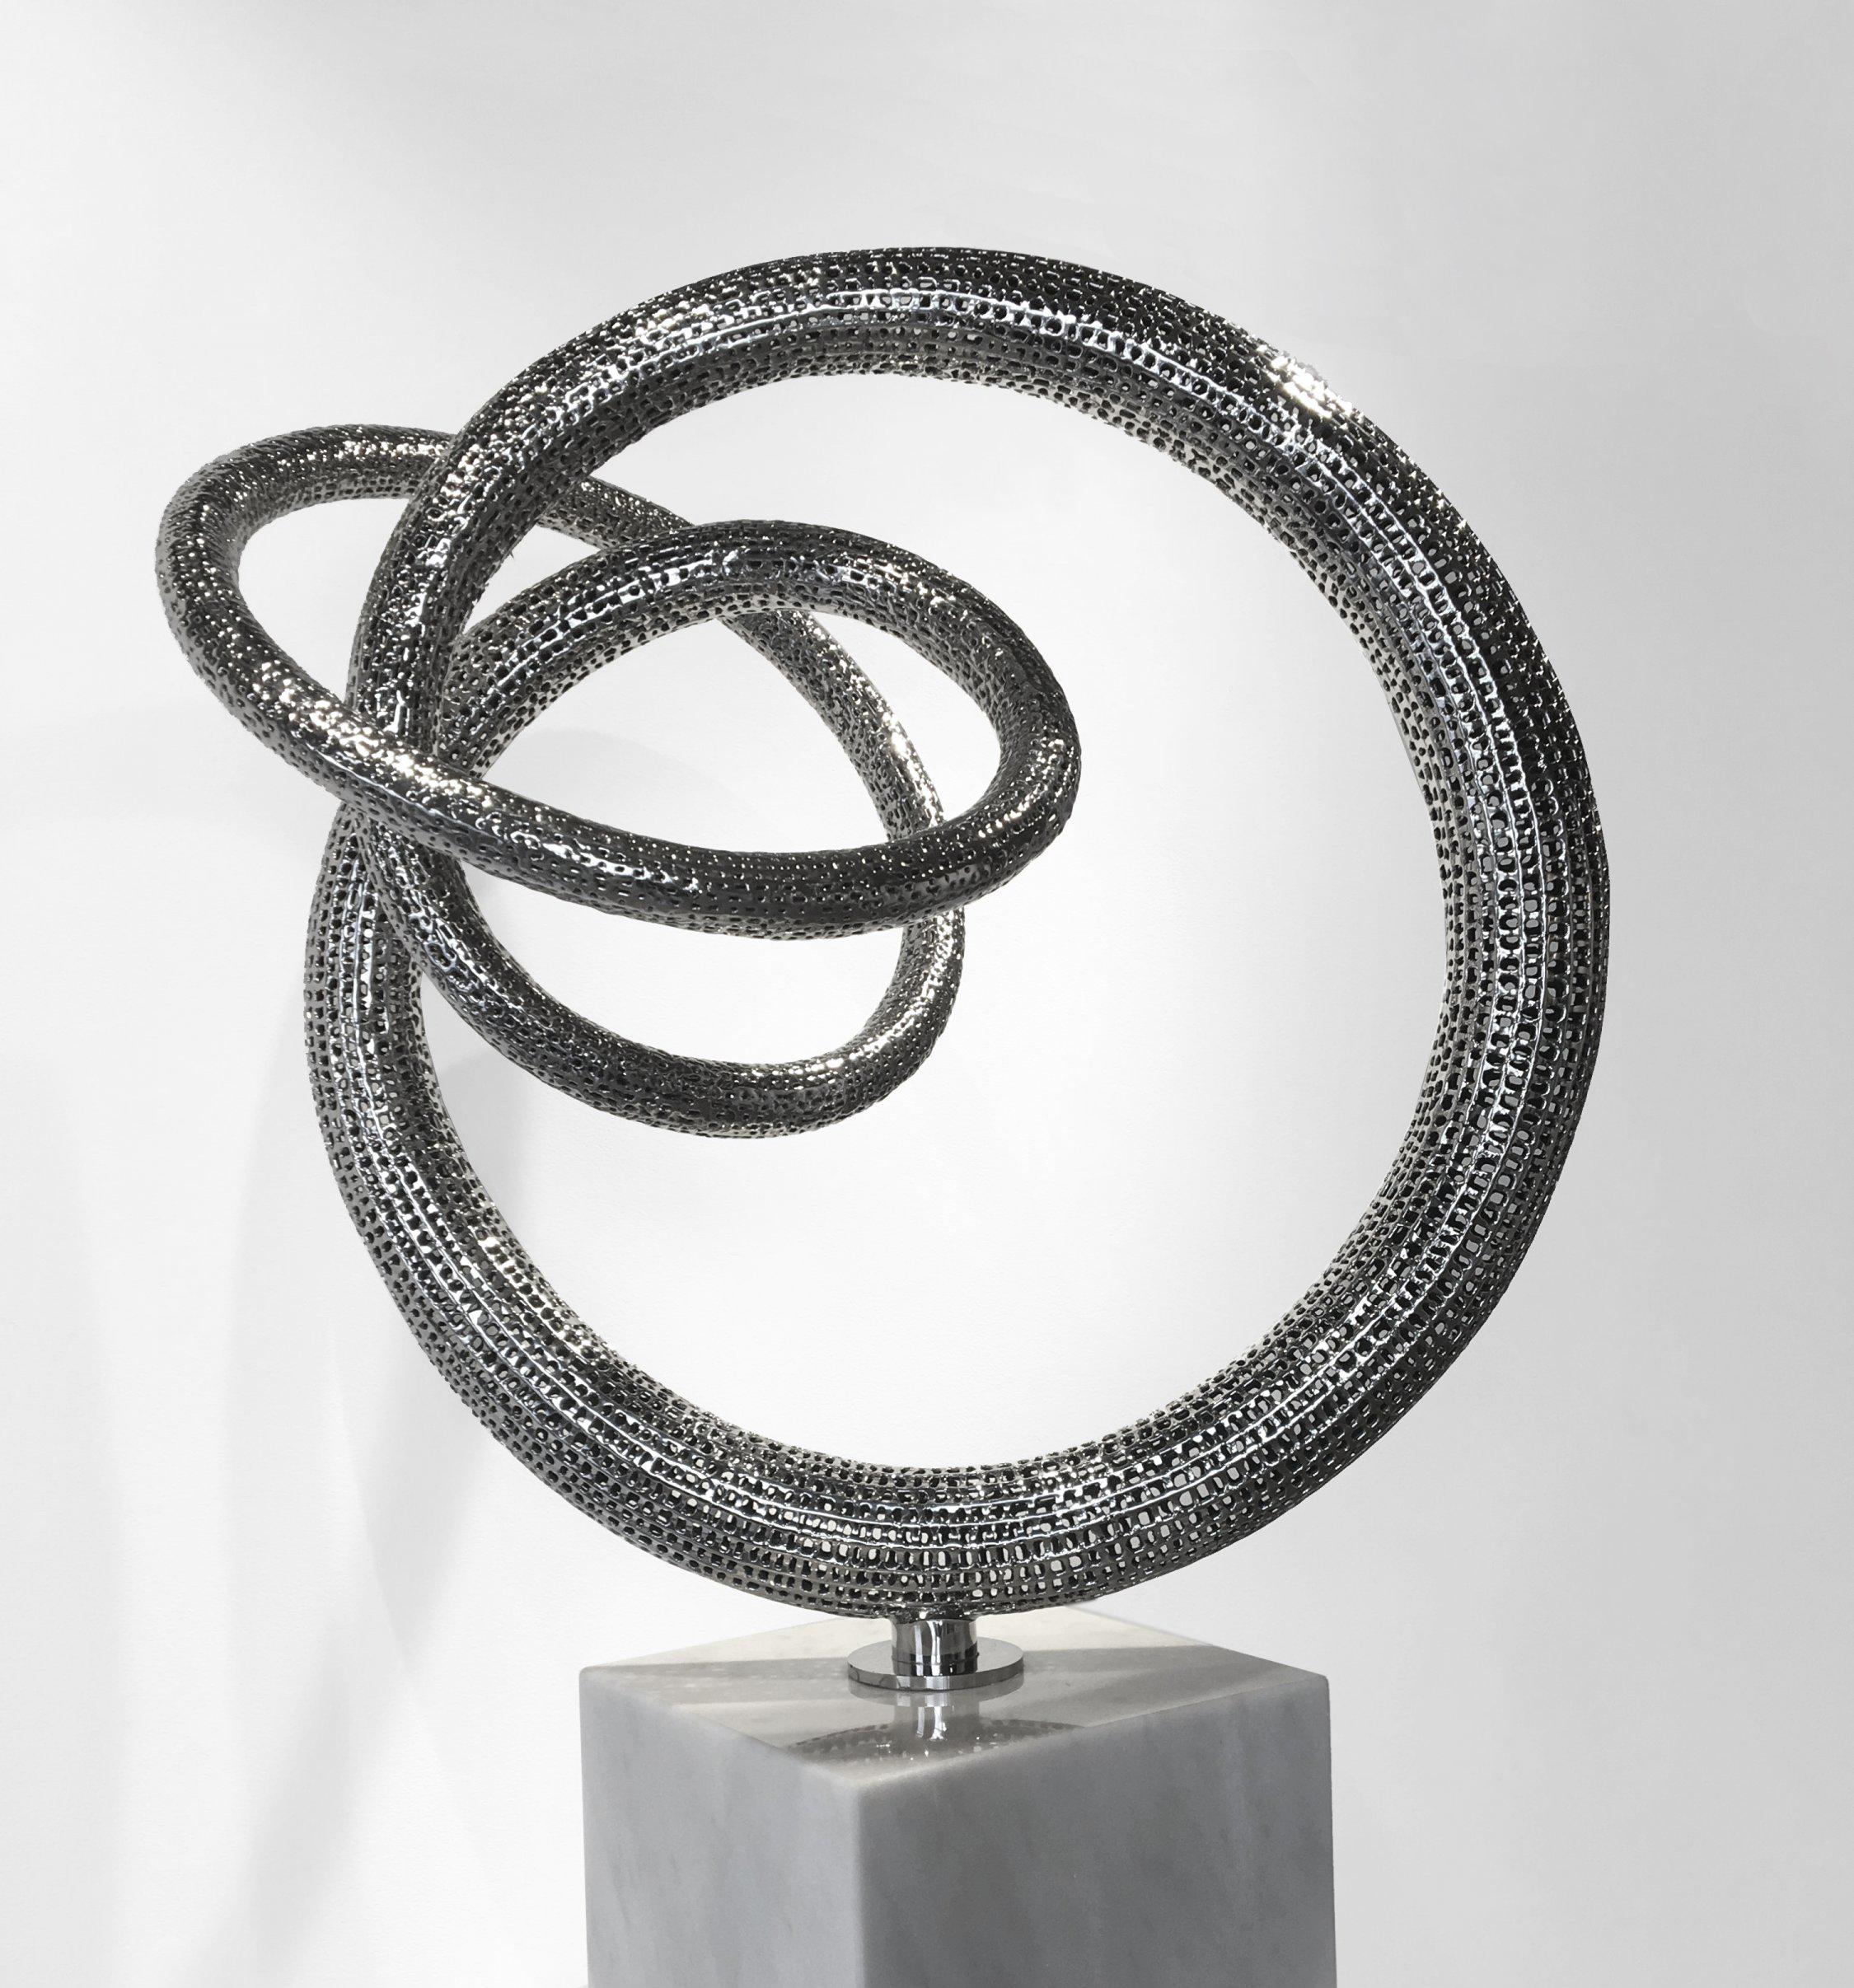 Oblivion (small) - 21st Cent, Contemporary, Abstract Sculpture, Stainless Steel